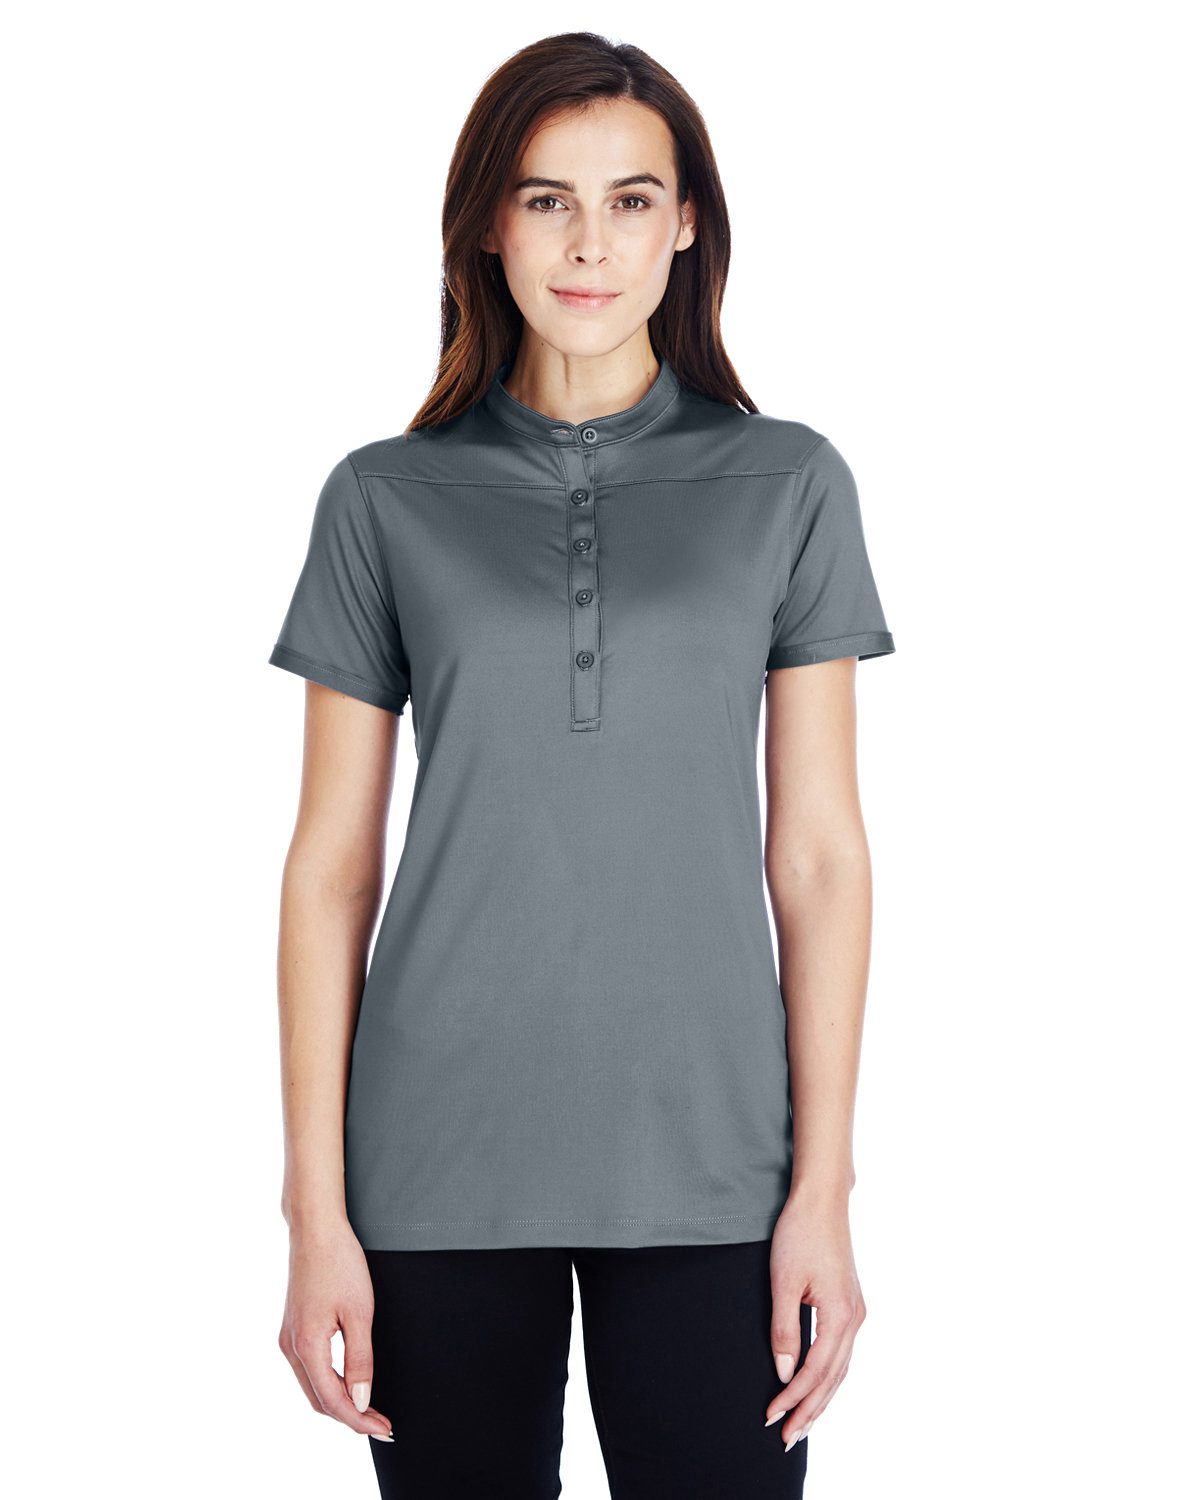 Under Armour Ladies' Corporate Performance Polo 2.0 #1317218